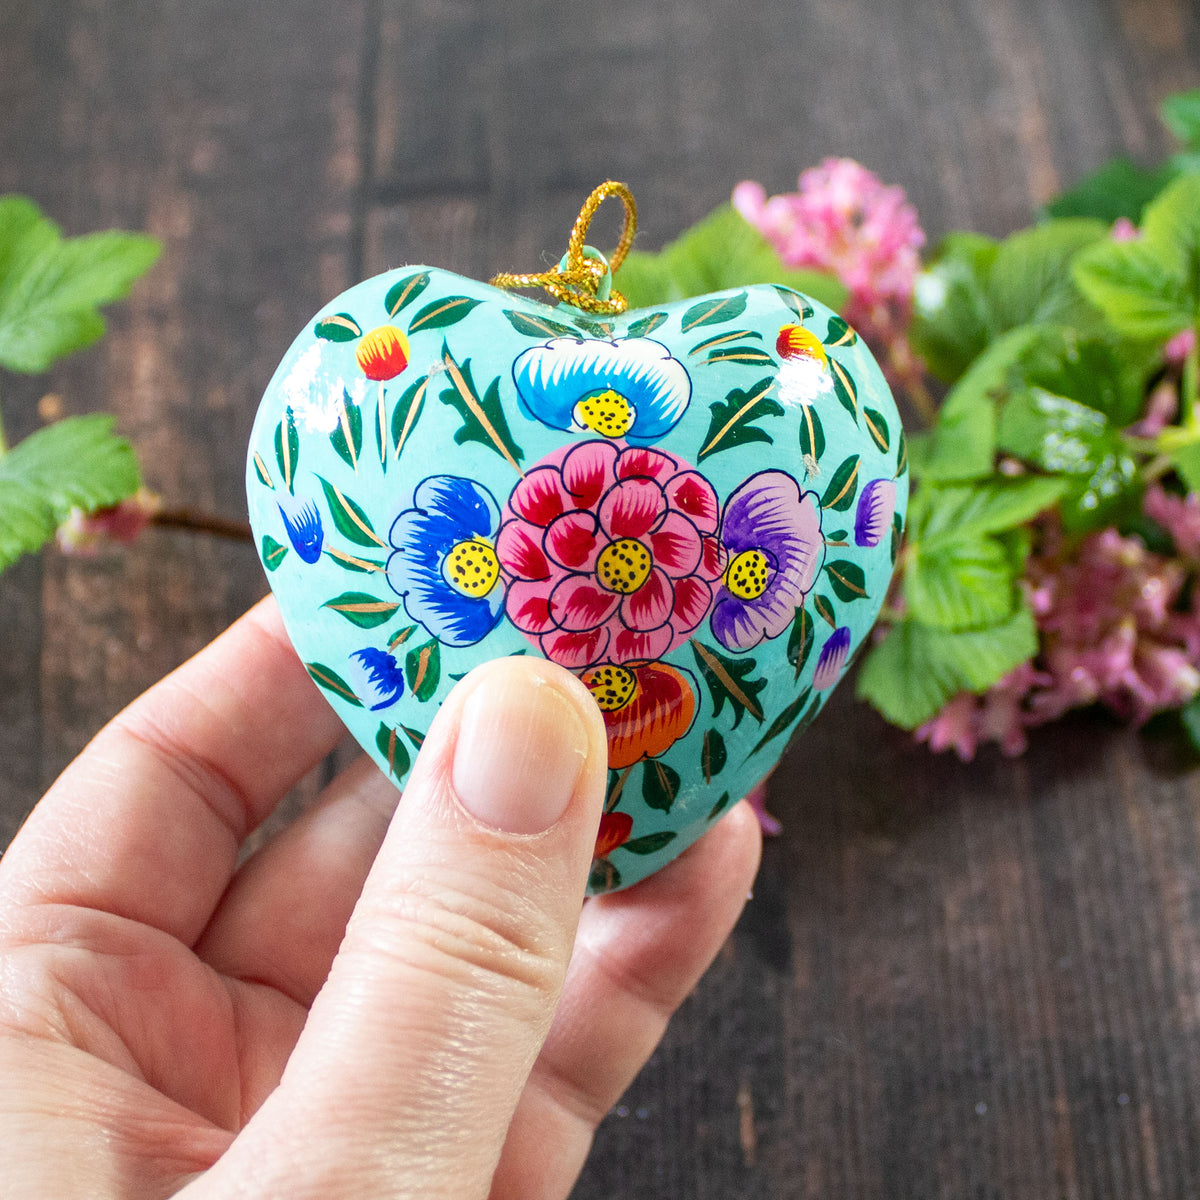 Hanging Spring Decoration - Painted Heart - Turquoise Flowers